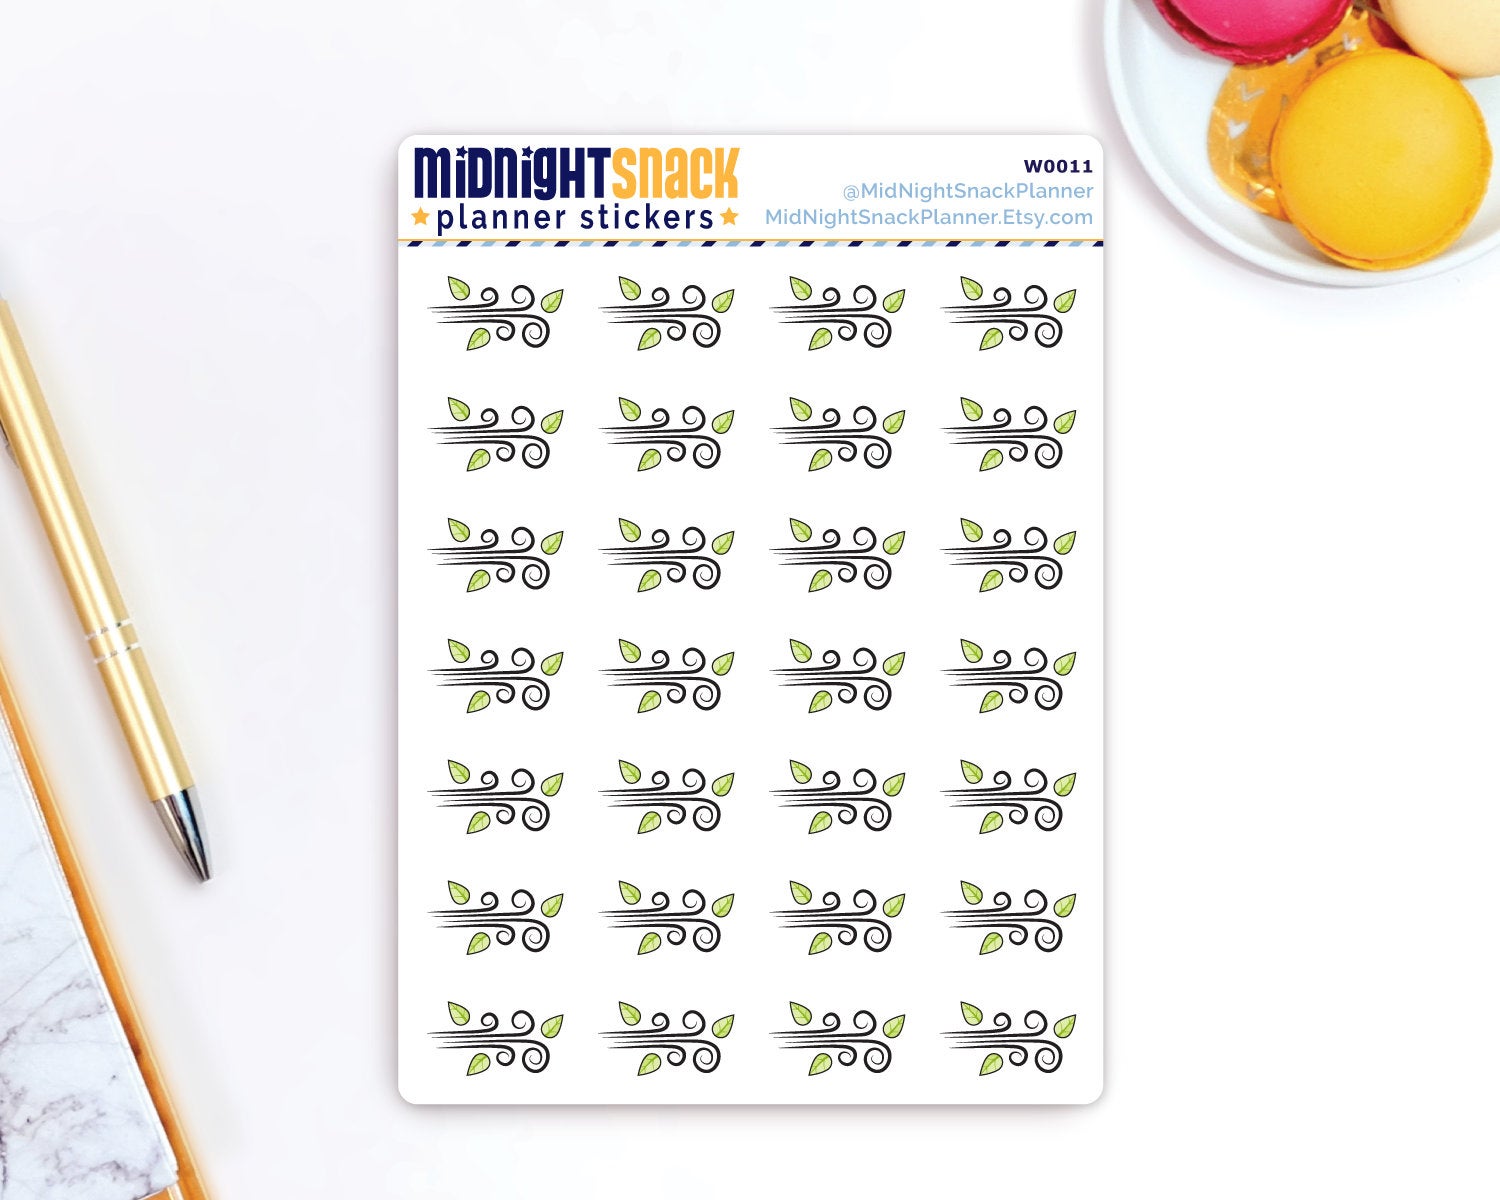 Windy Day Icon: Weather Planner Stickers Midnight Snack Planner